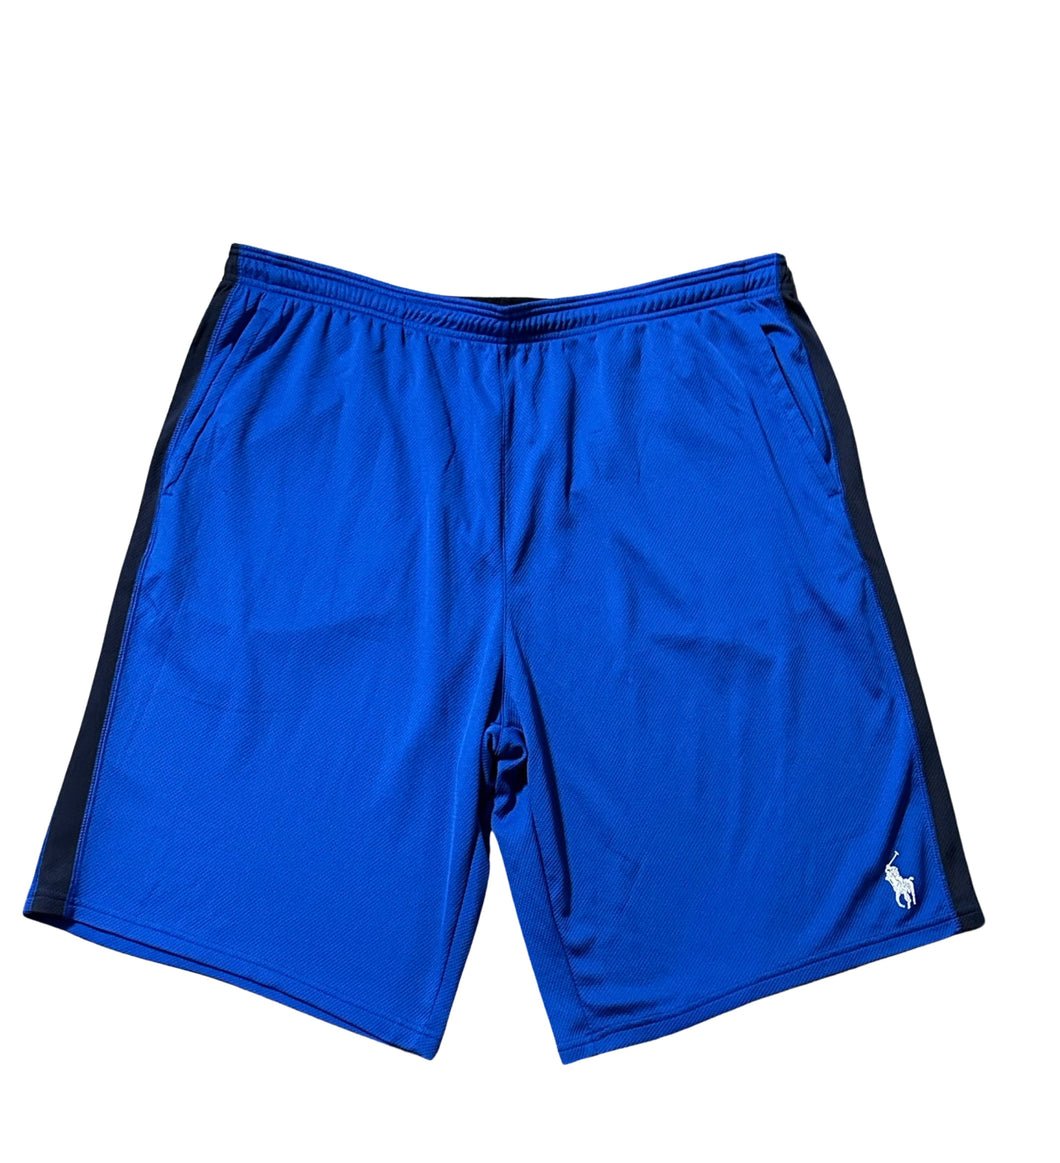 Polo Ralph Lauren Shorts (Big and Tall)